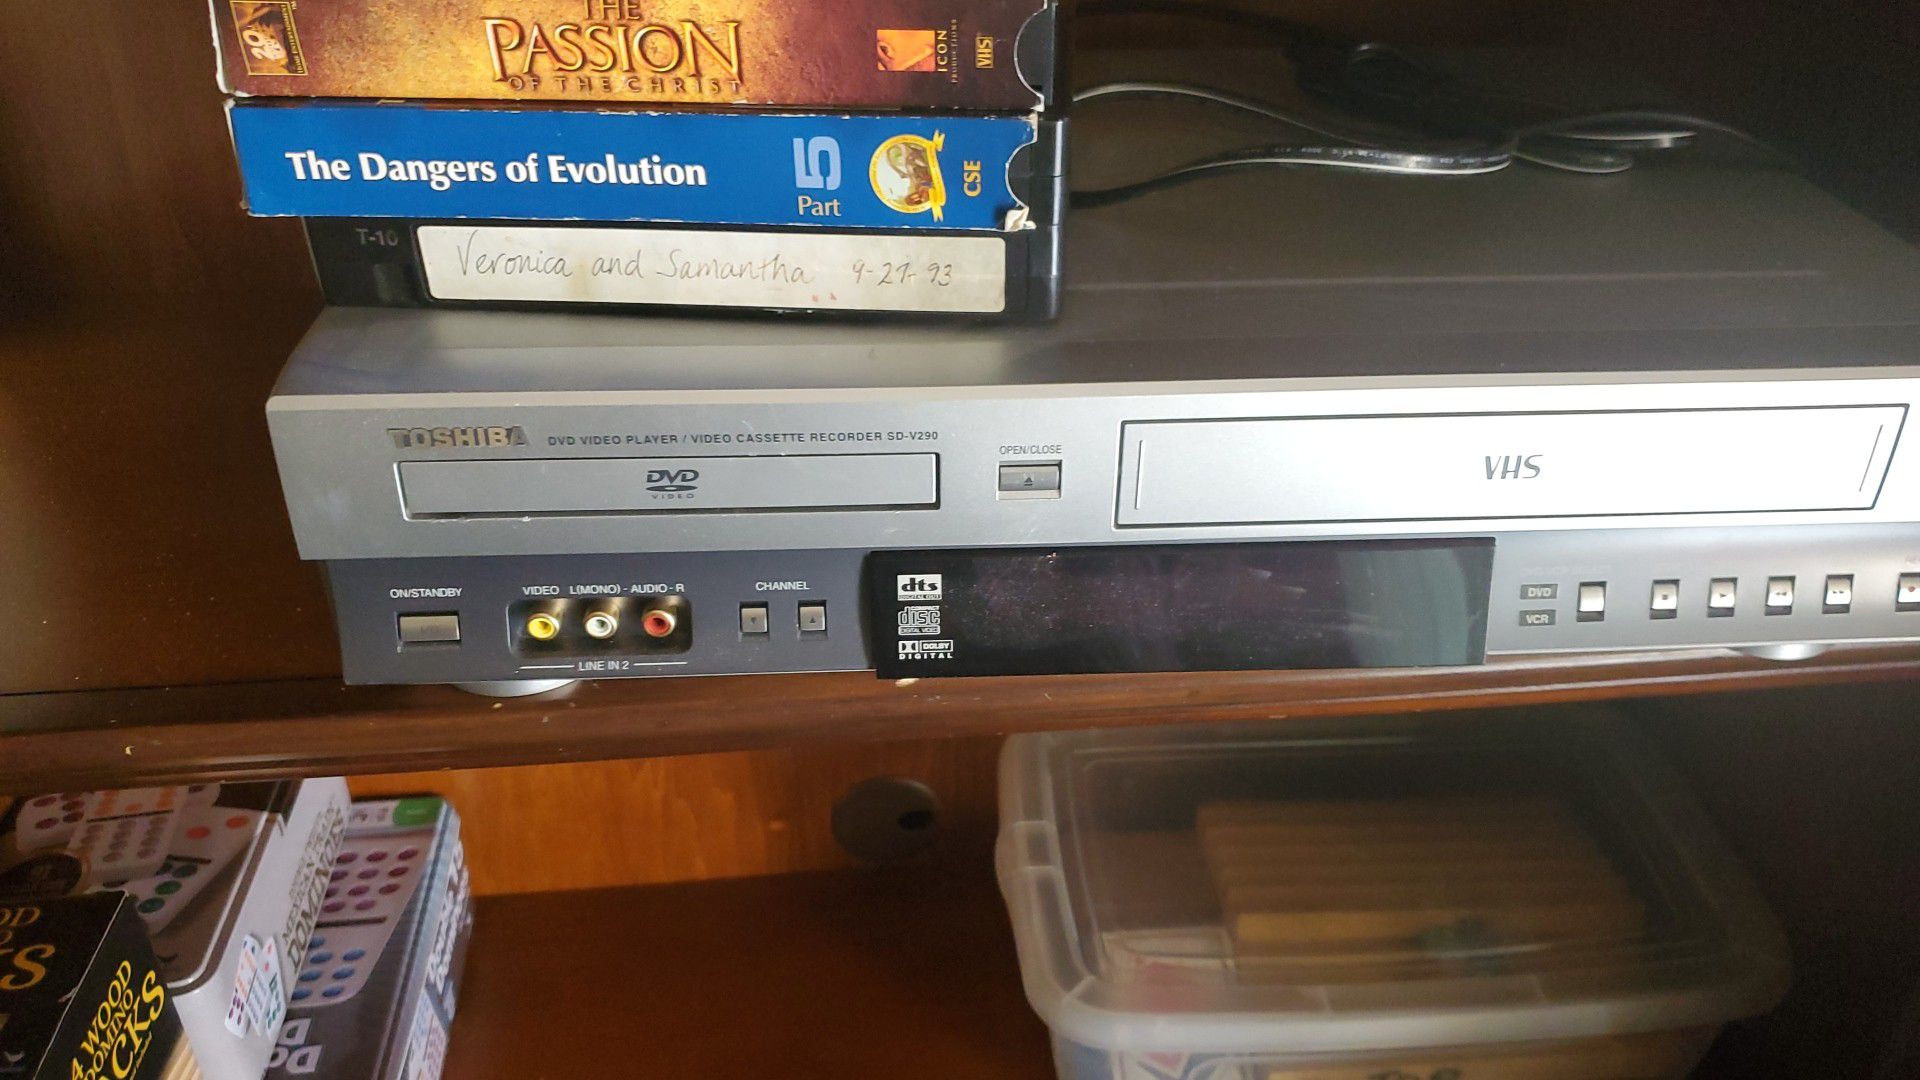 Toshiba dvd and vhs player